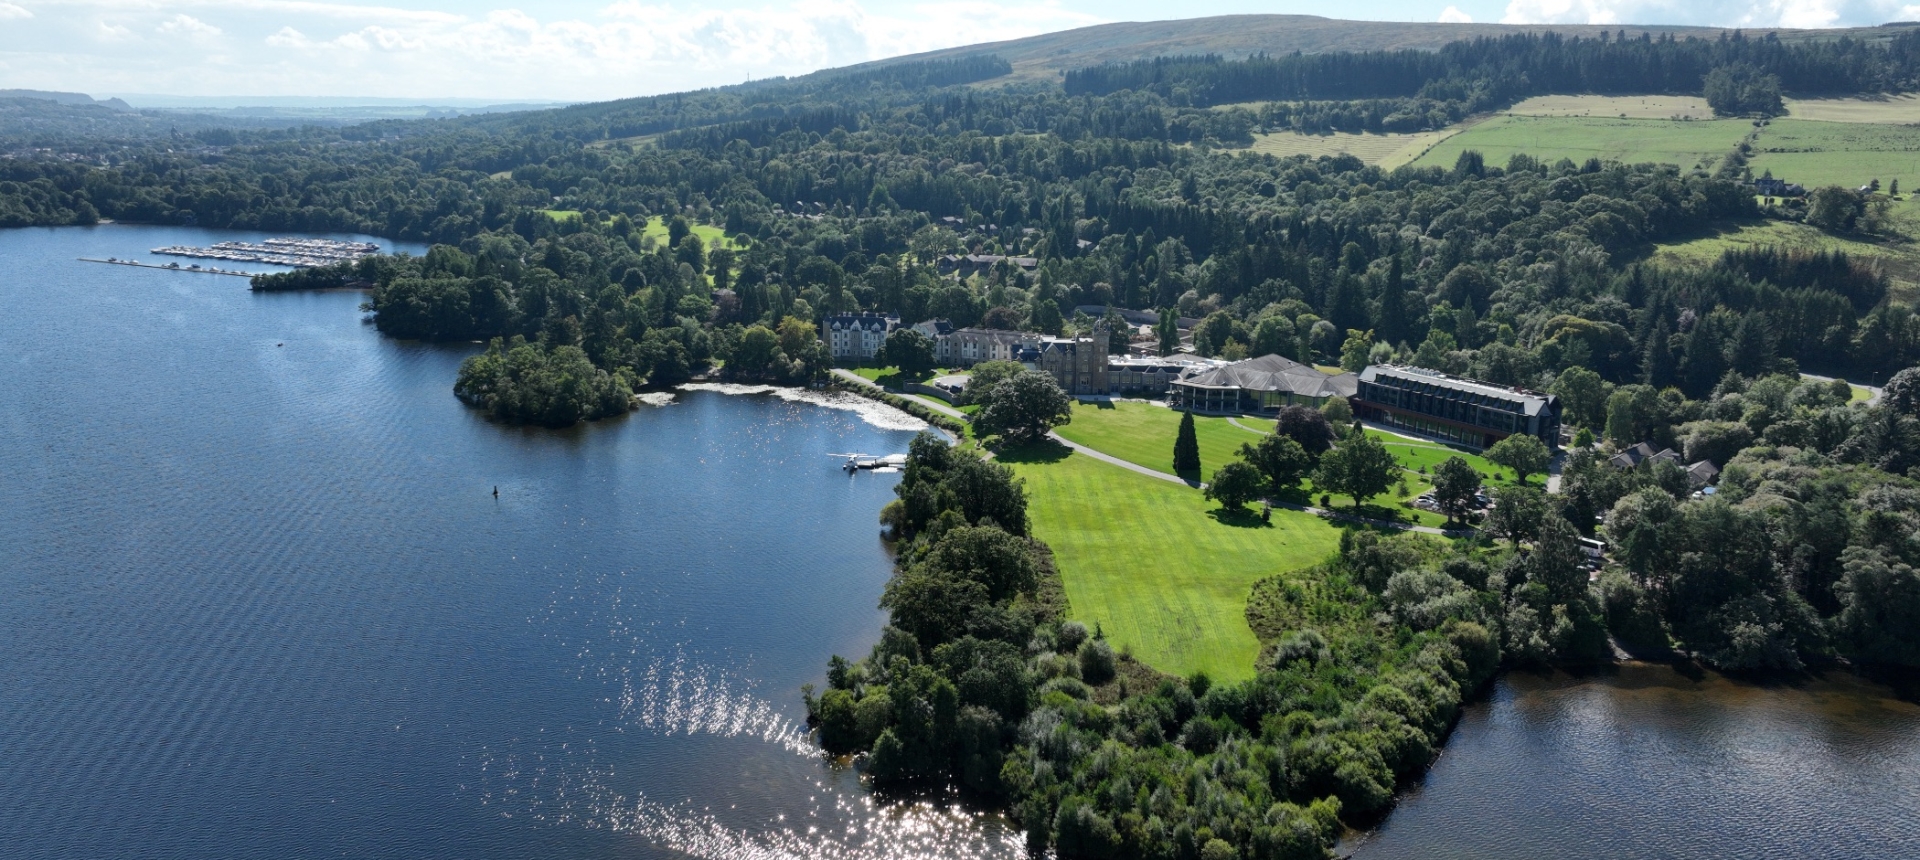 Aerial view of Loch Lomond with Cameron House in the background